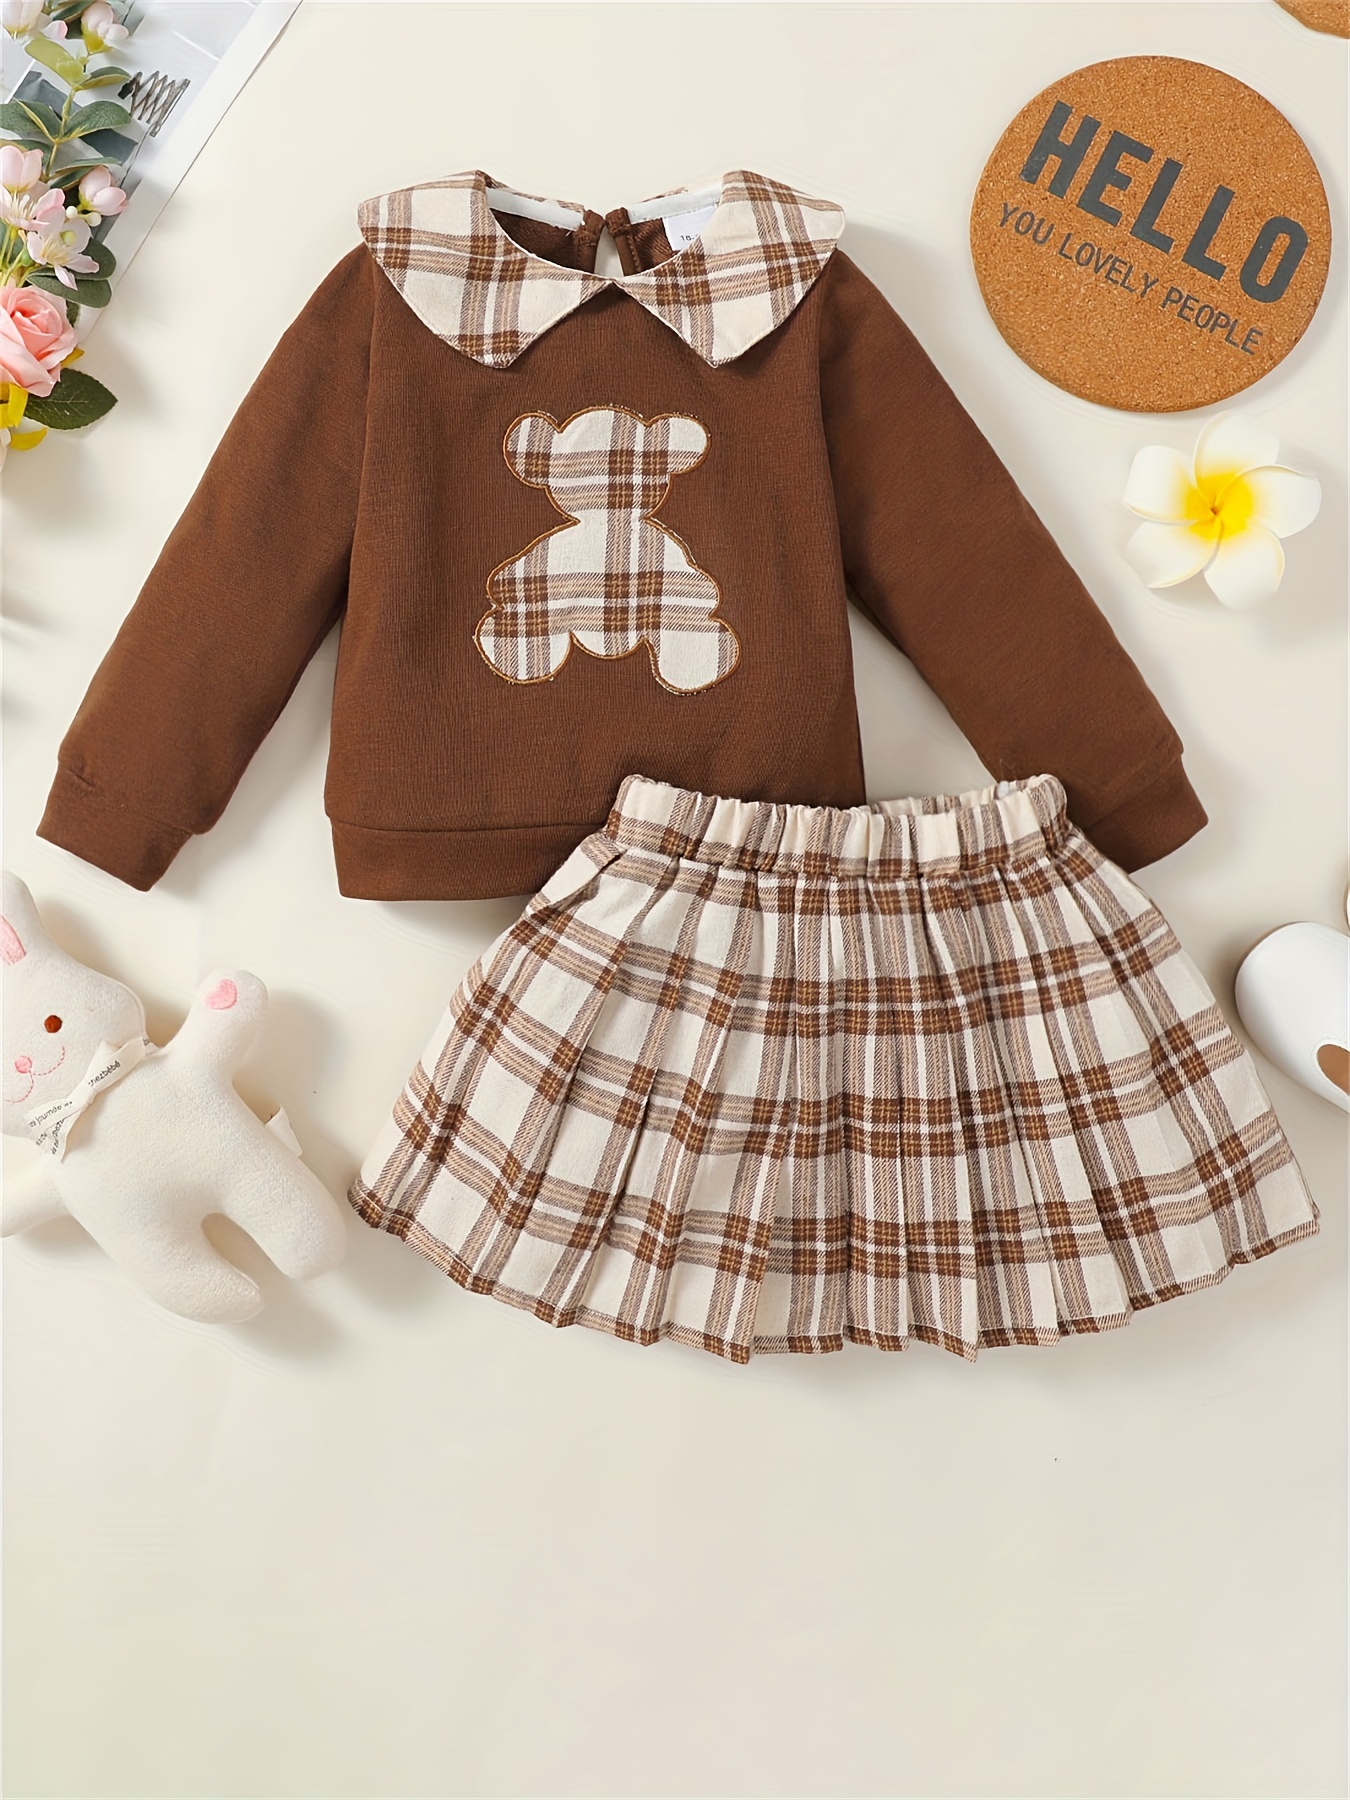 Toddler Girl's Preppy Style 2pcs, Long Sleeve Top & Pleated Skirt Set,  Cartoon Bear Patched Plaid Pattern Casual Outfits, Kids Clothes For Spring  Autu